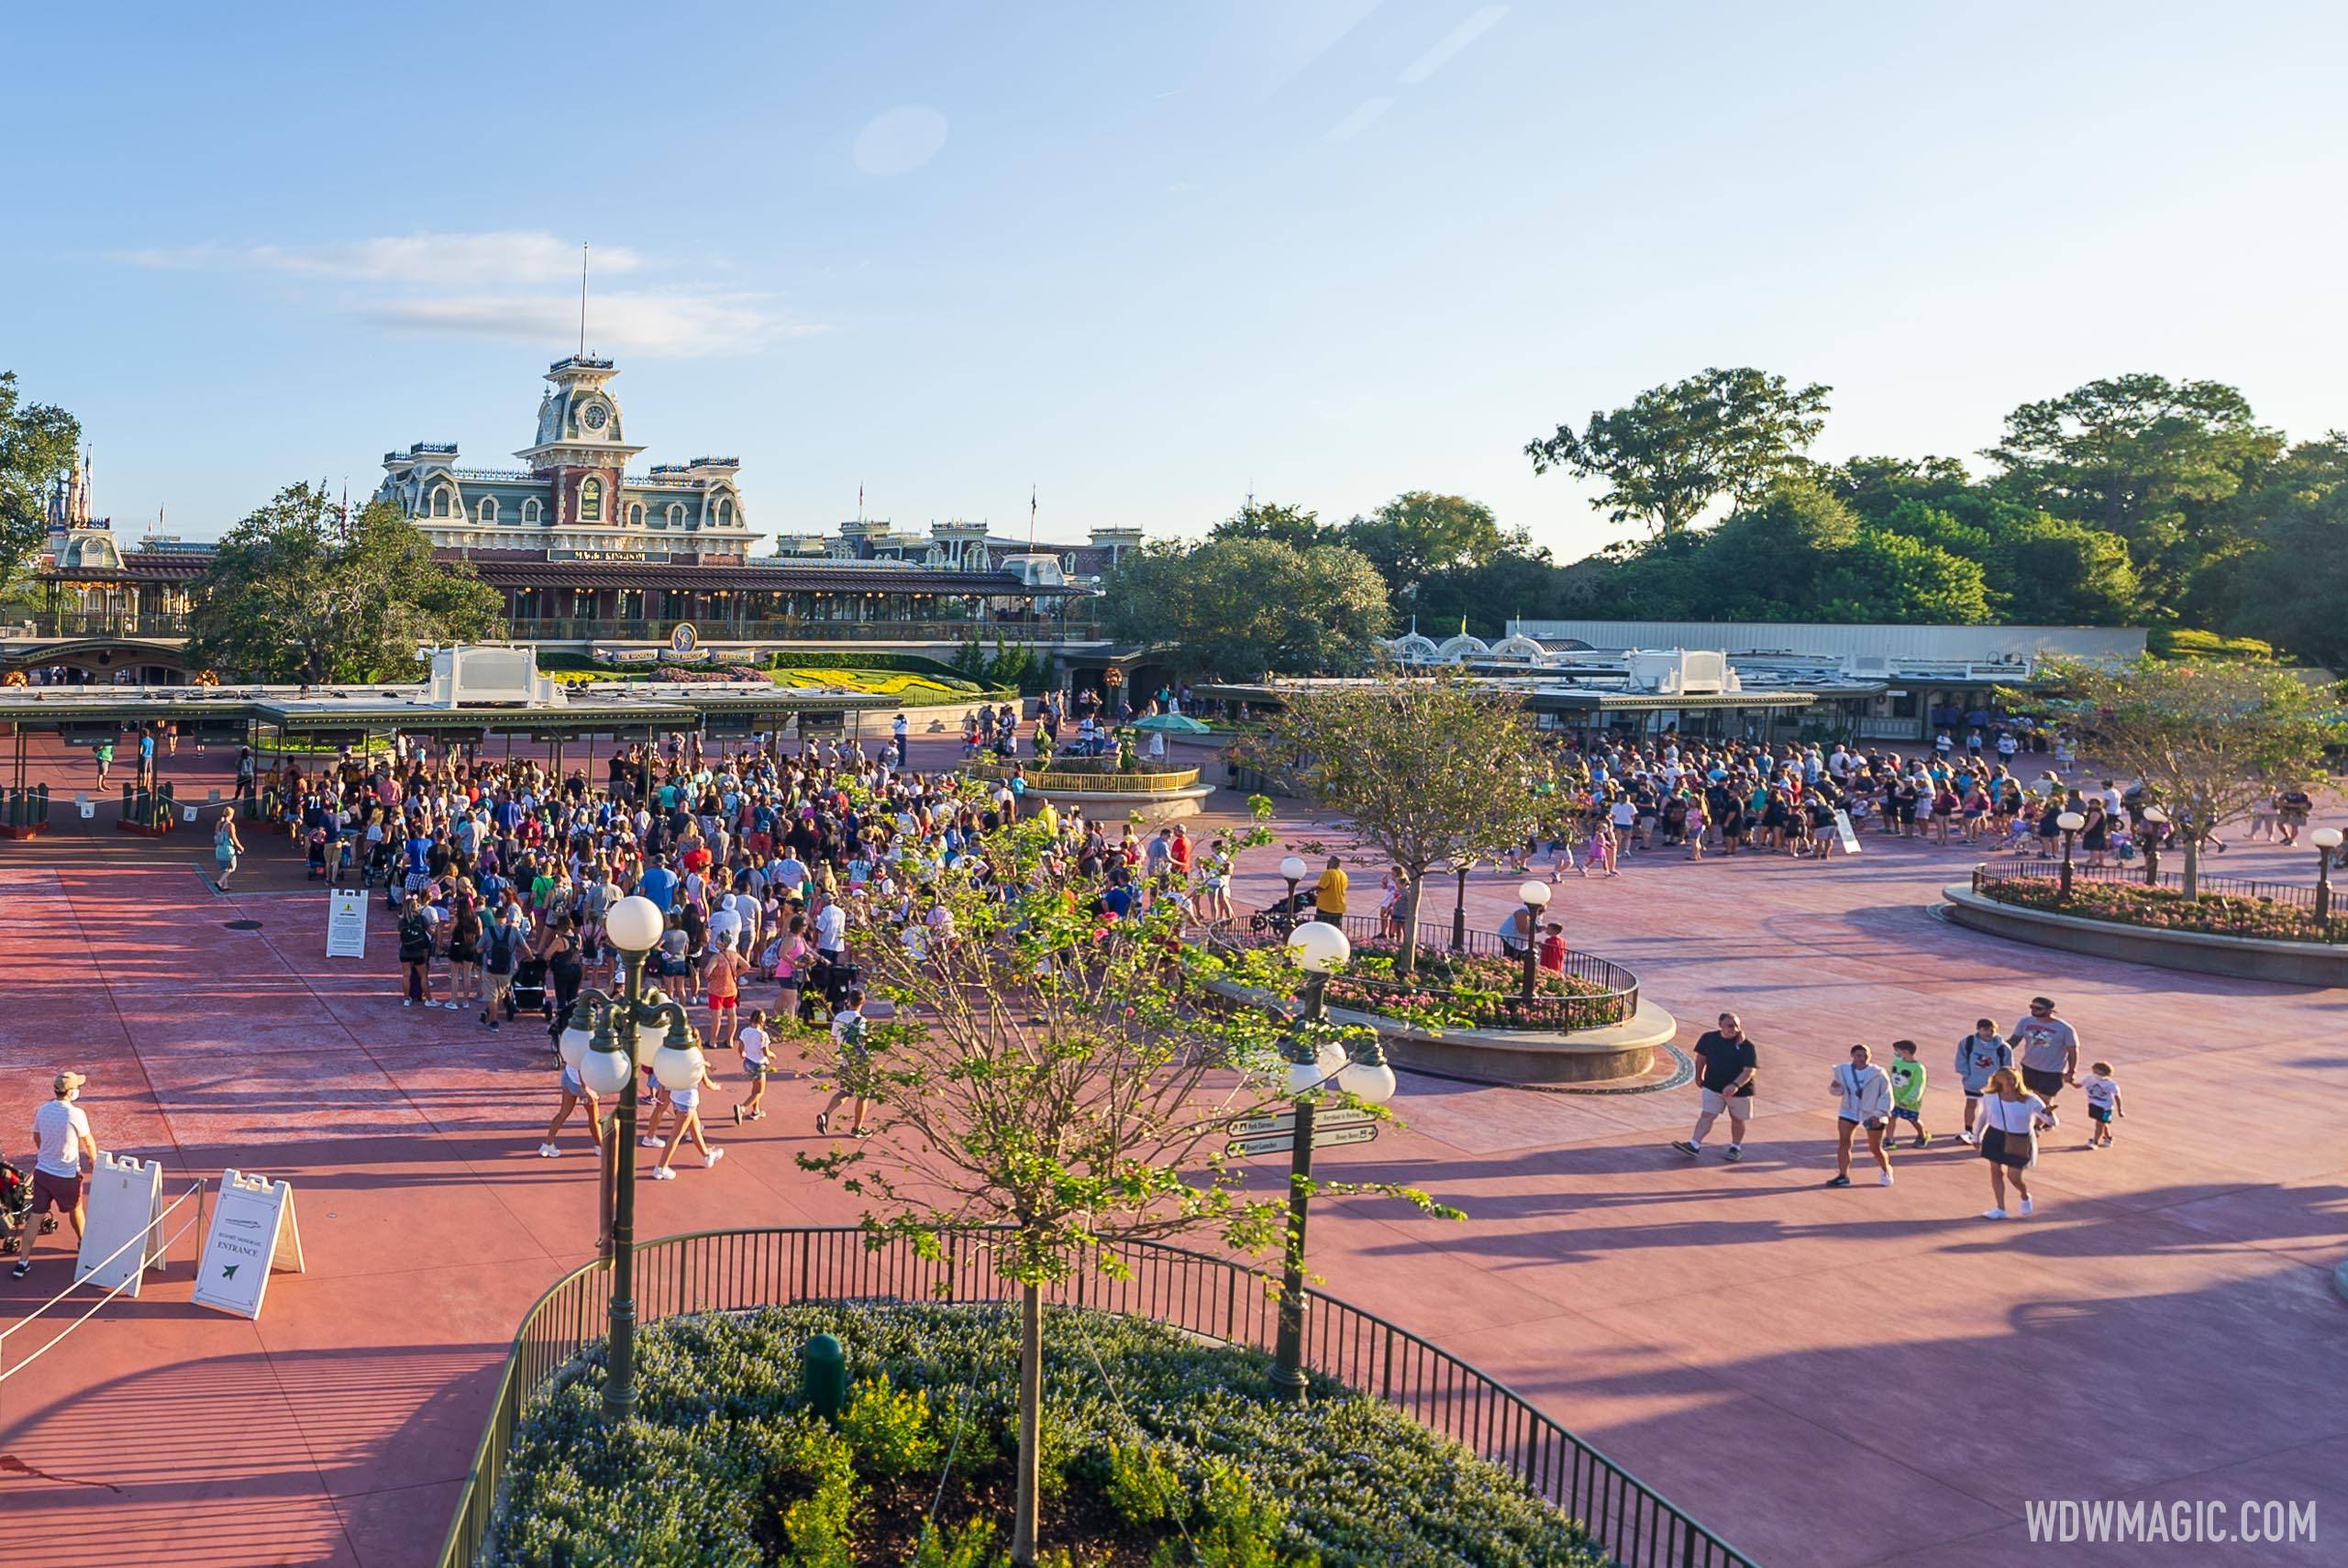 Guests arriving for Early Theme Park Entry at Magic Kingdom